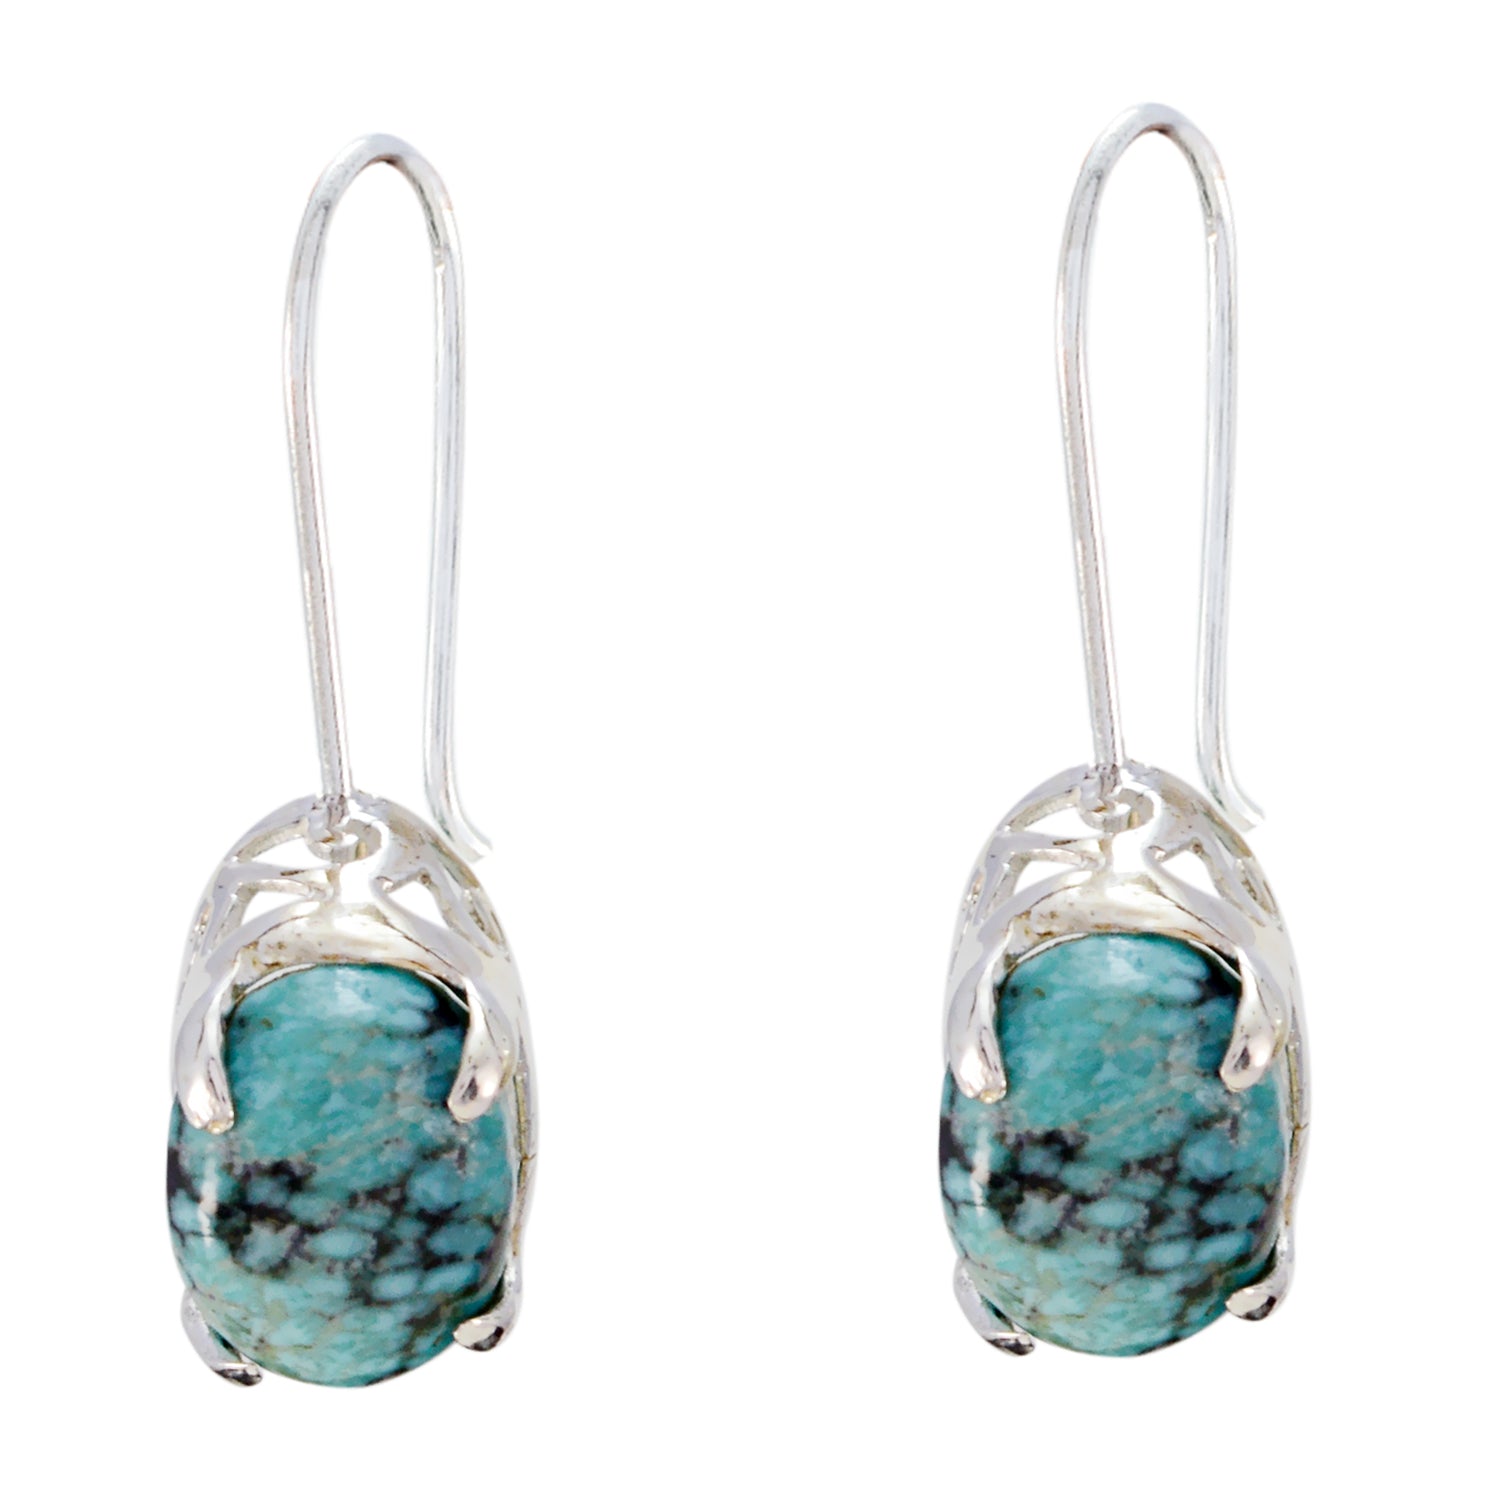 Riyo Good Gemstones oval Cabochon Multi Turquoise Silver Earrings independence gift